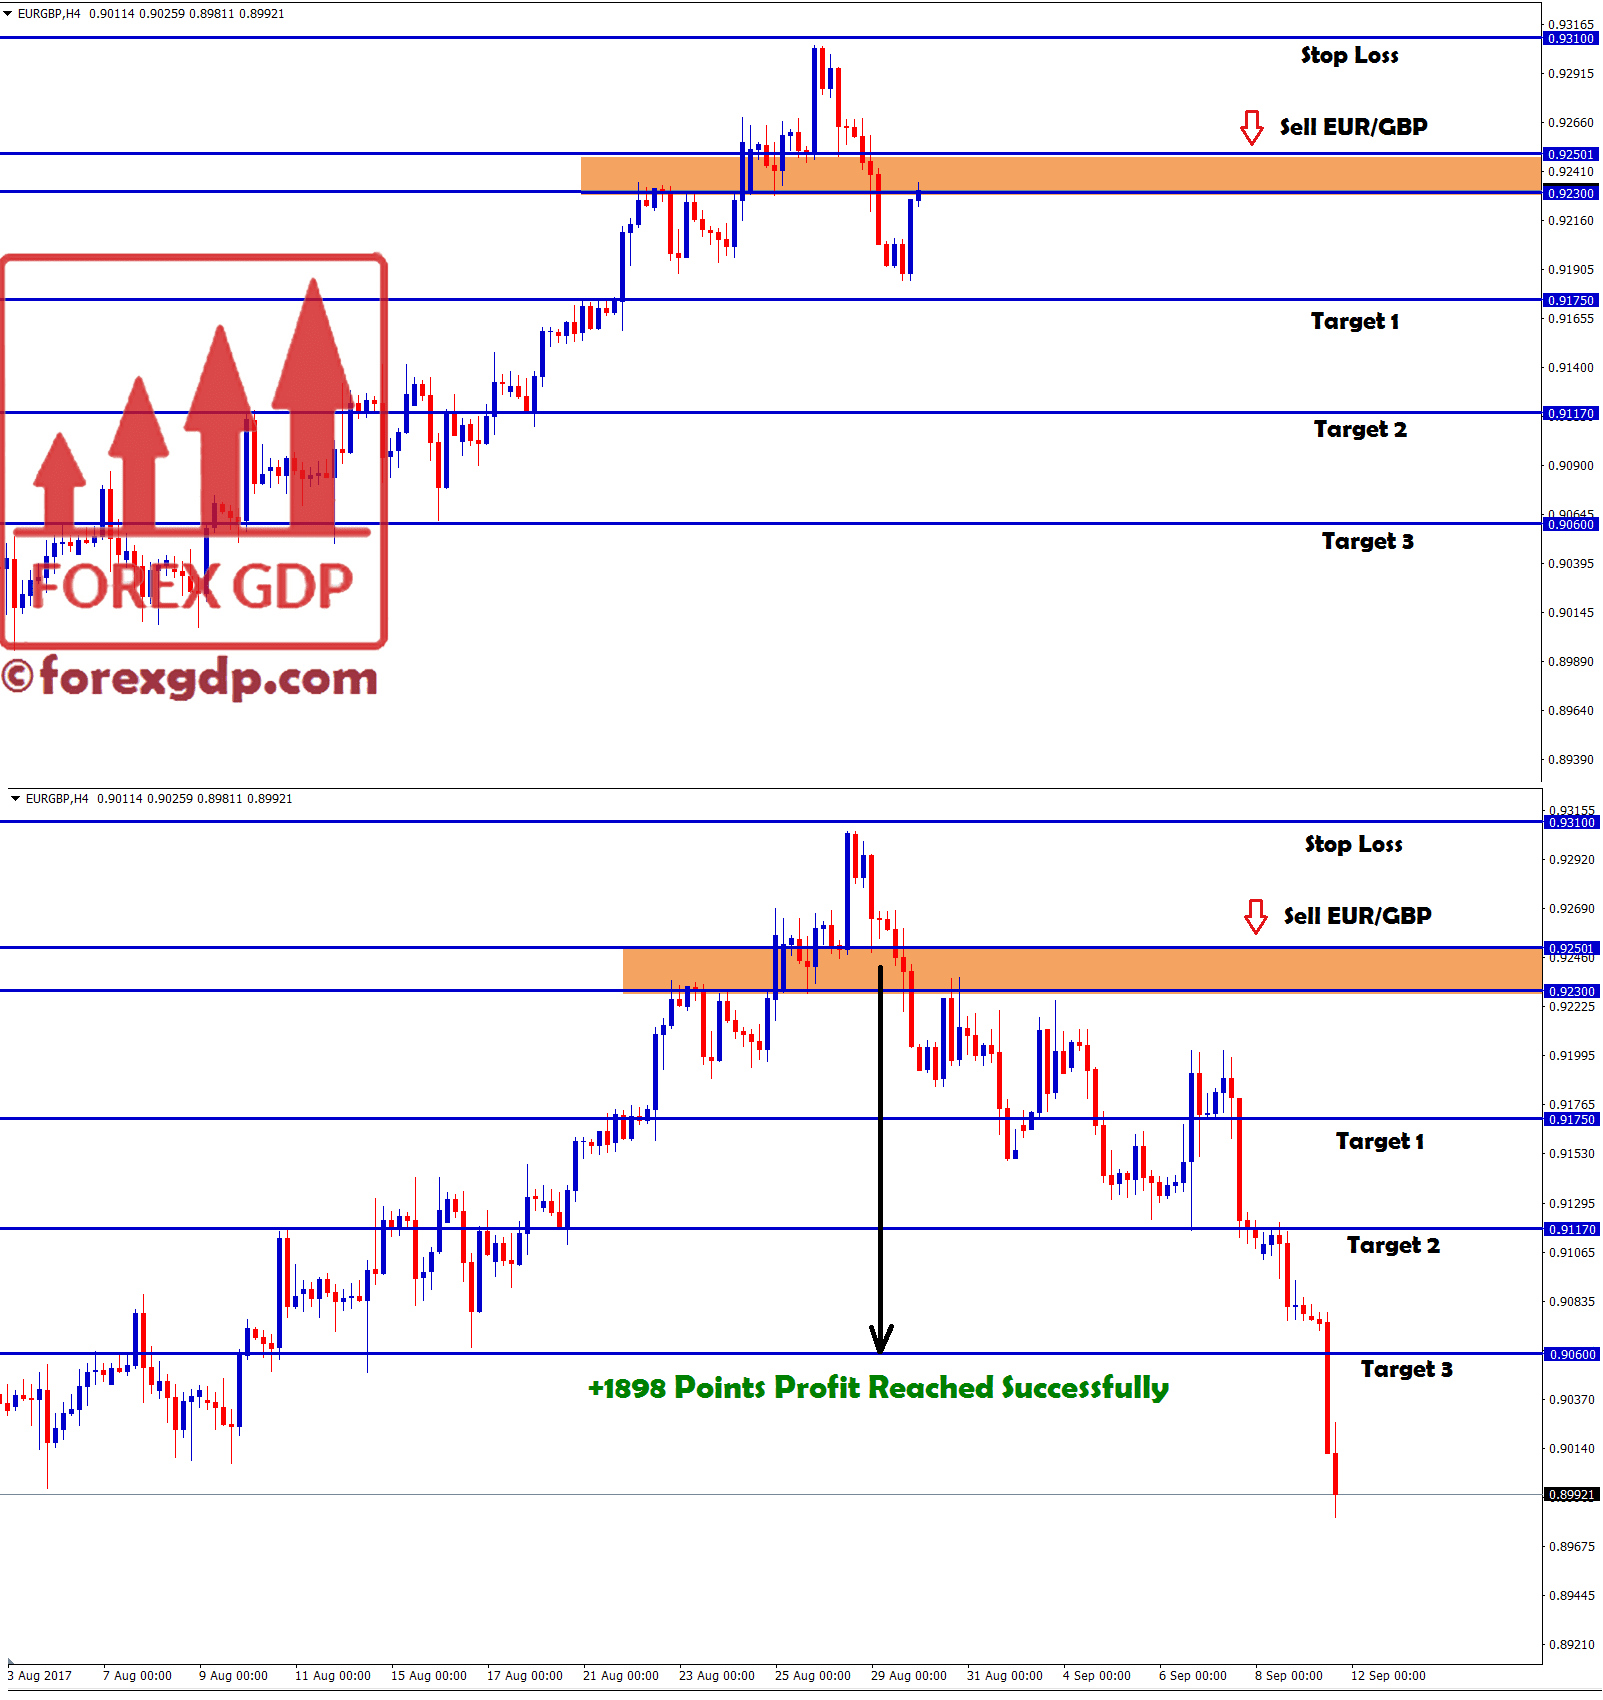 Sell EUR GBP at higher high for making nice profits in sell trade